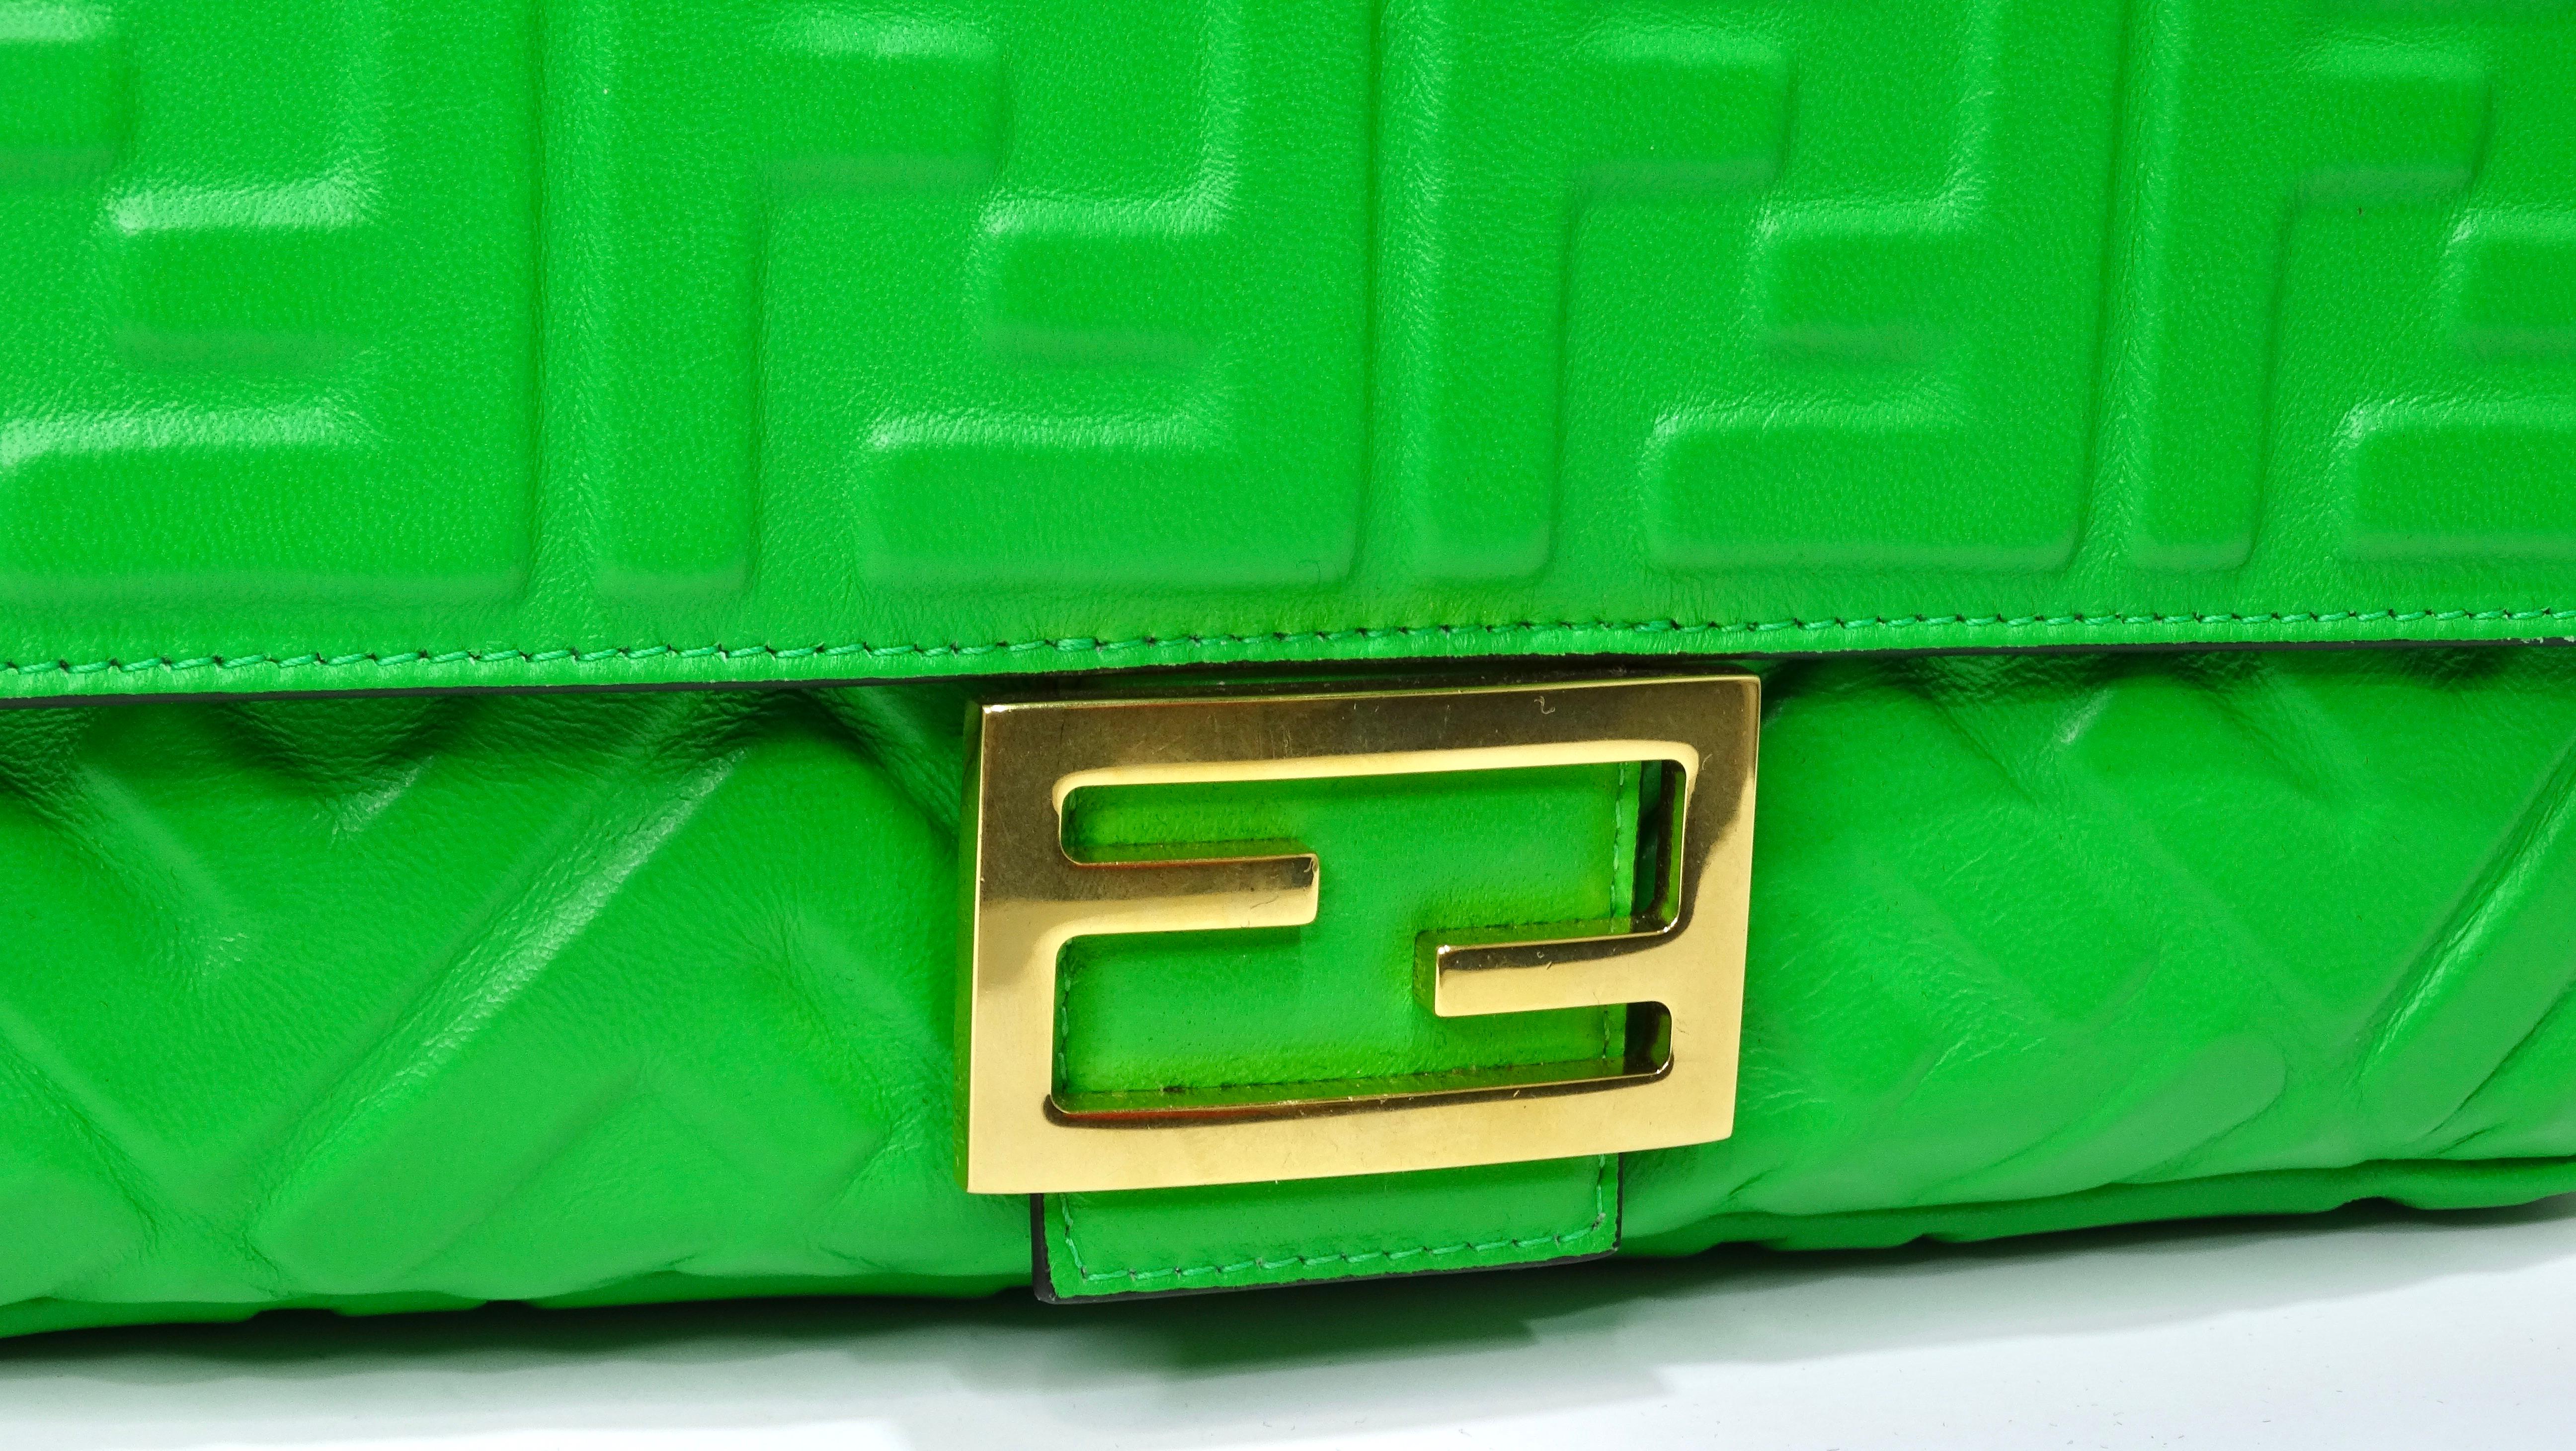 A beautiful piece to say the least! Everyone needs a green bag in their collection, this is your sign! This is an authentic FENDI Nappa FF Embossed Baguette in green. This chic and iconic baguette is crafted of Fendi monogram-embossed lambskin